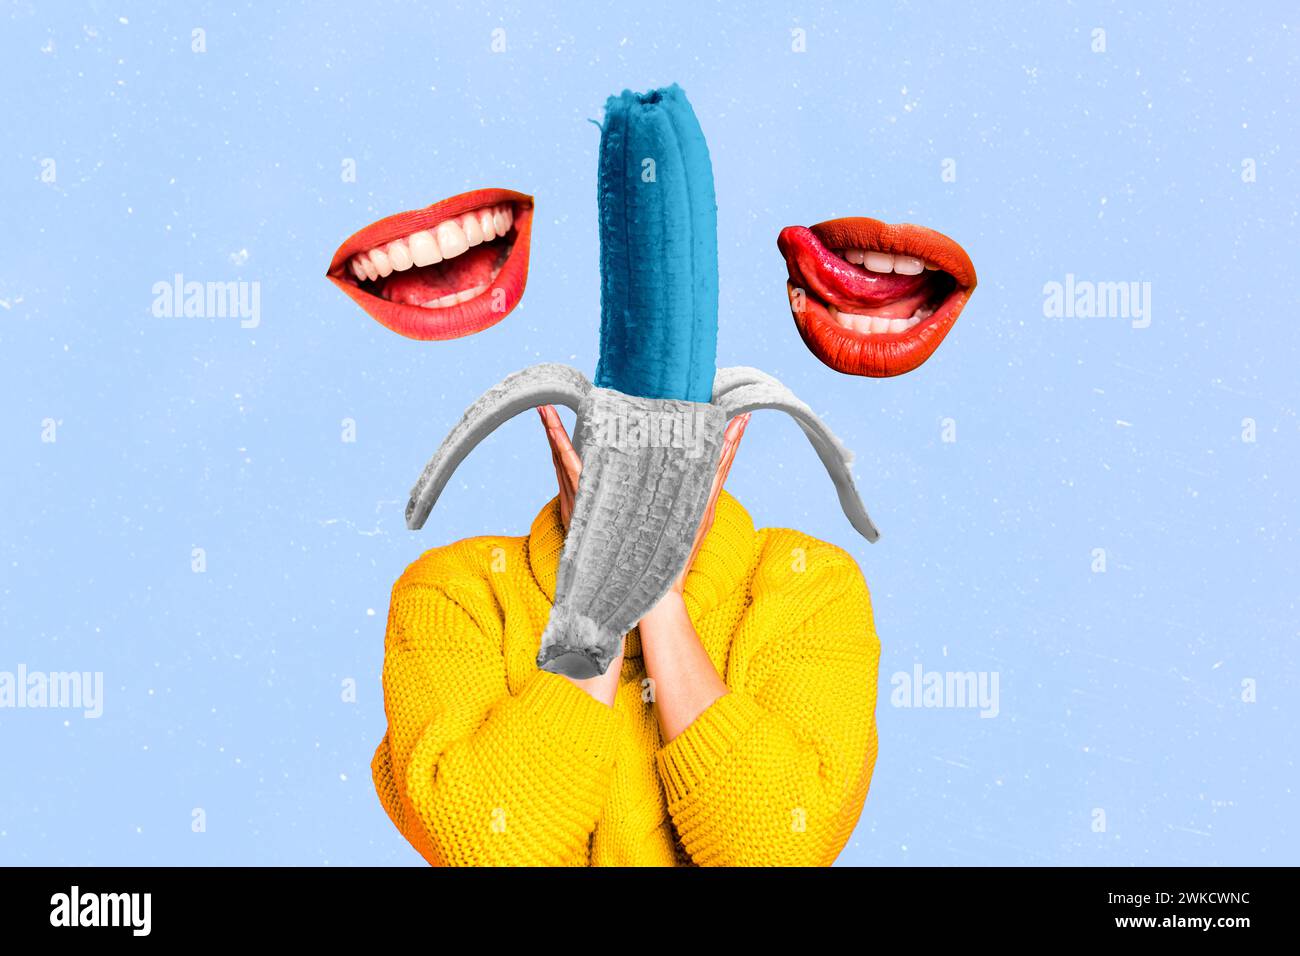 Composite image magazine sketch collage of girl yellow sweater half body hold blue ripe banana instead head lips smile teeth tongue isolated on blue Stock Photo